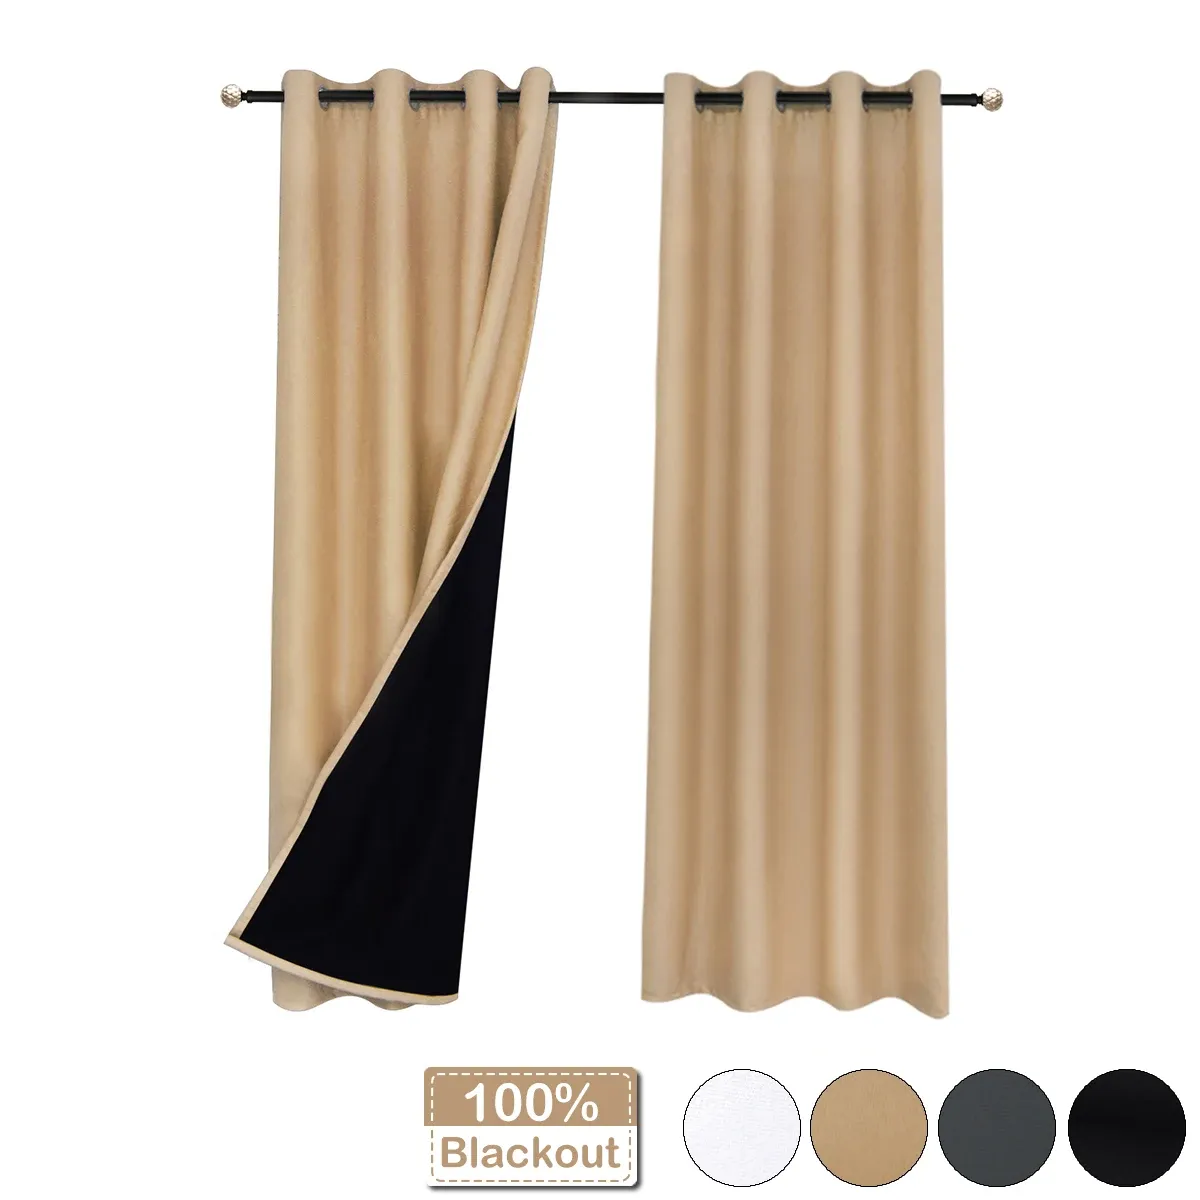 Curtains Insulated Thermal Drapes 100% Blackout Window Curtain Heat and Full Light Panel Blocking for Living Room Bedroom White Curtains